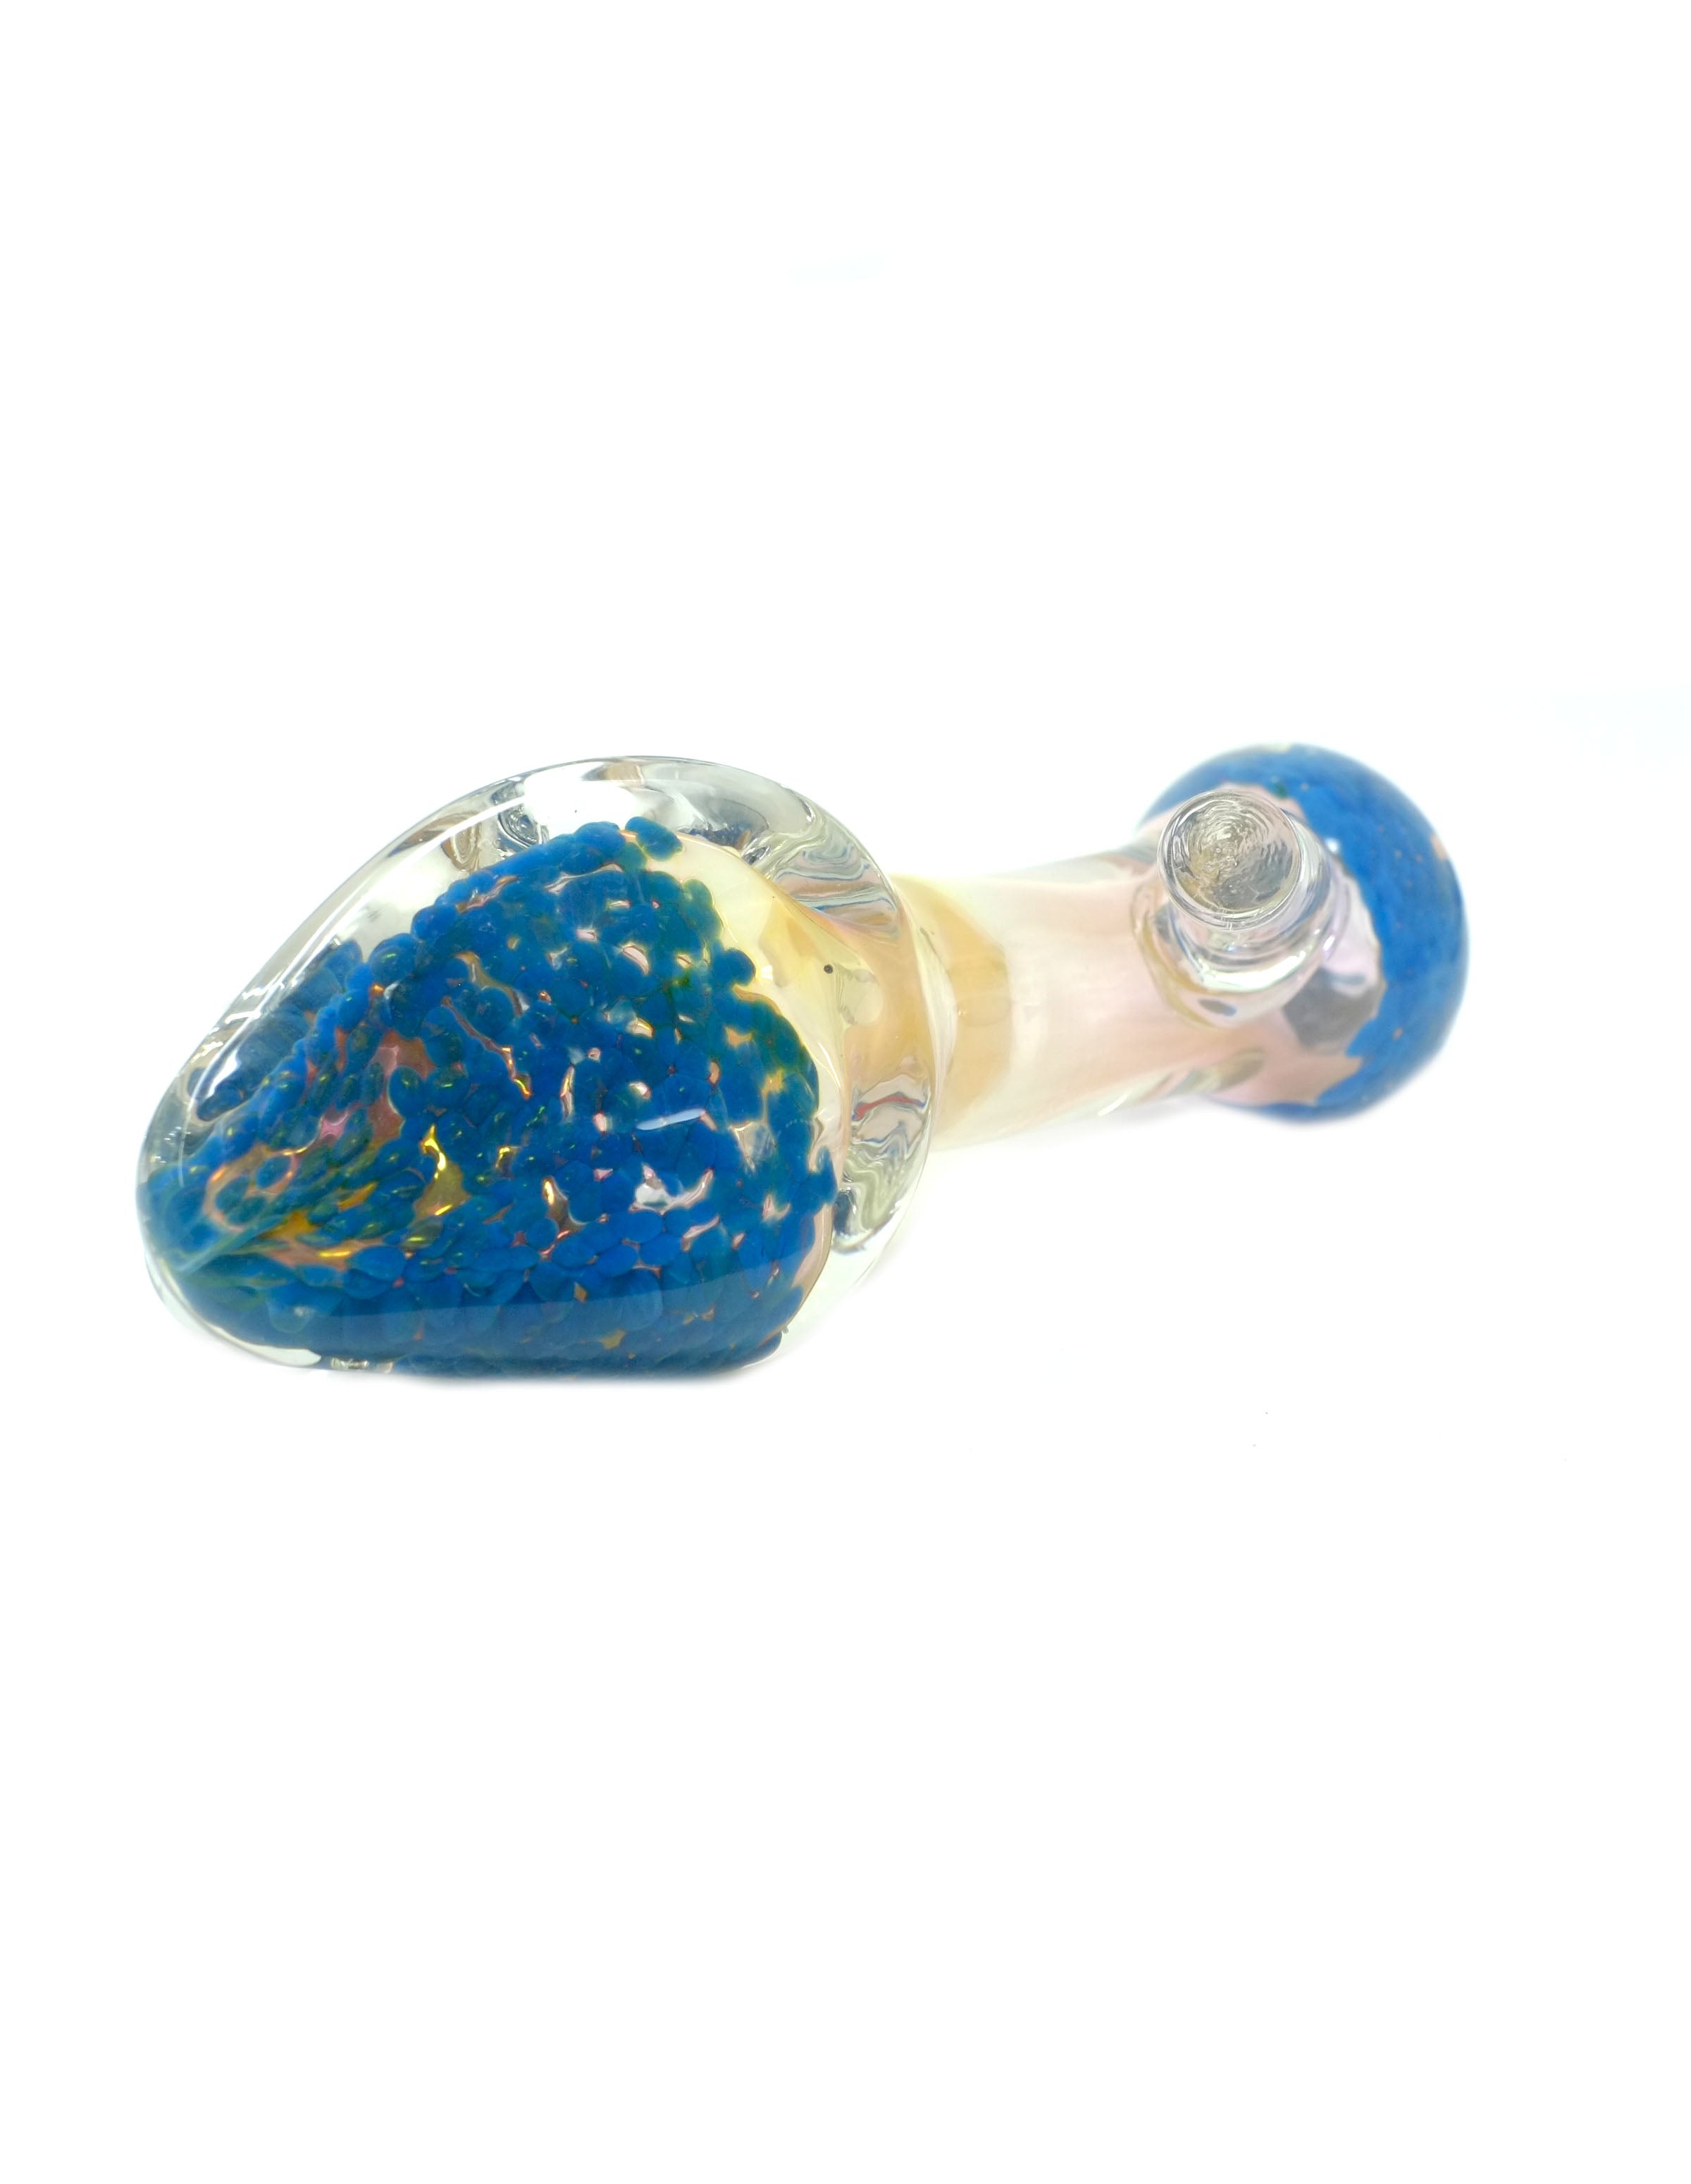 4" High Heel Glass Spoon Shoes Pipe